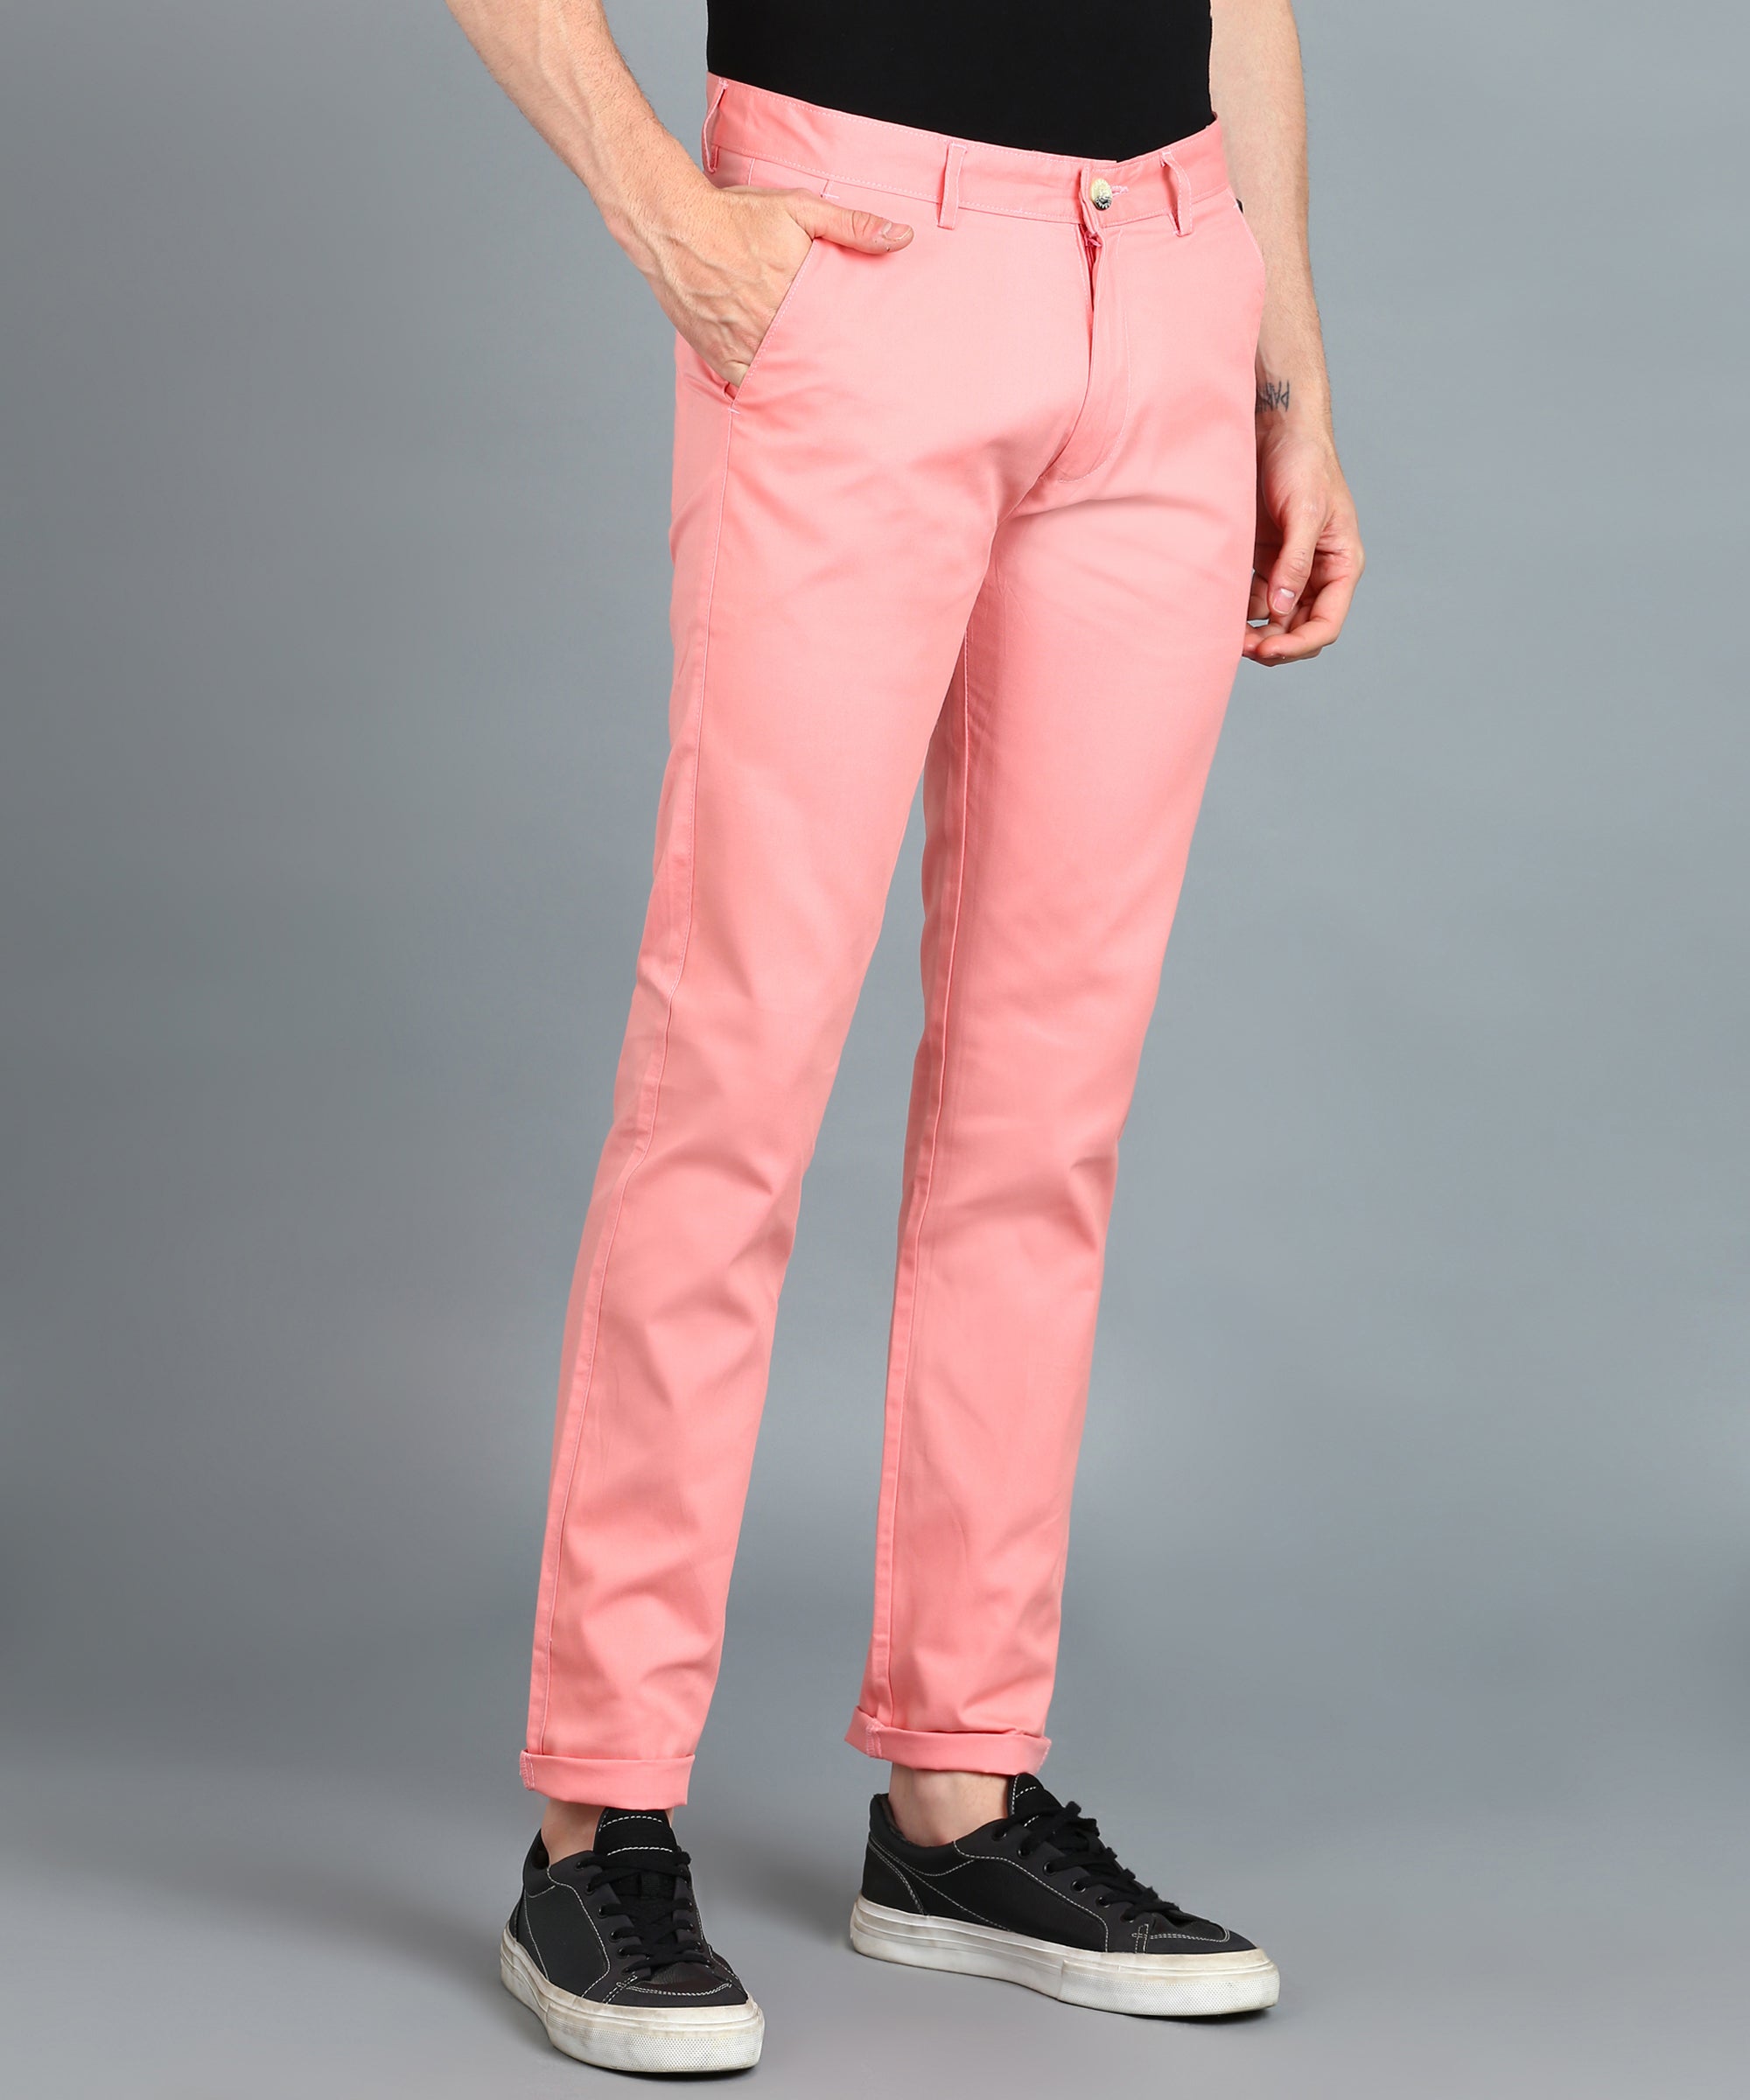 Urbano Fashion Men's Pink Cotton Light Weight Non-Stretch Slim Fit Casual Trousers